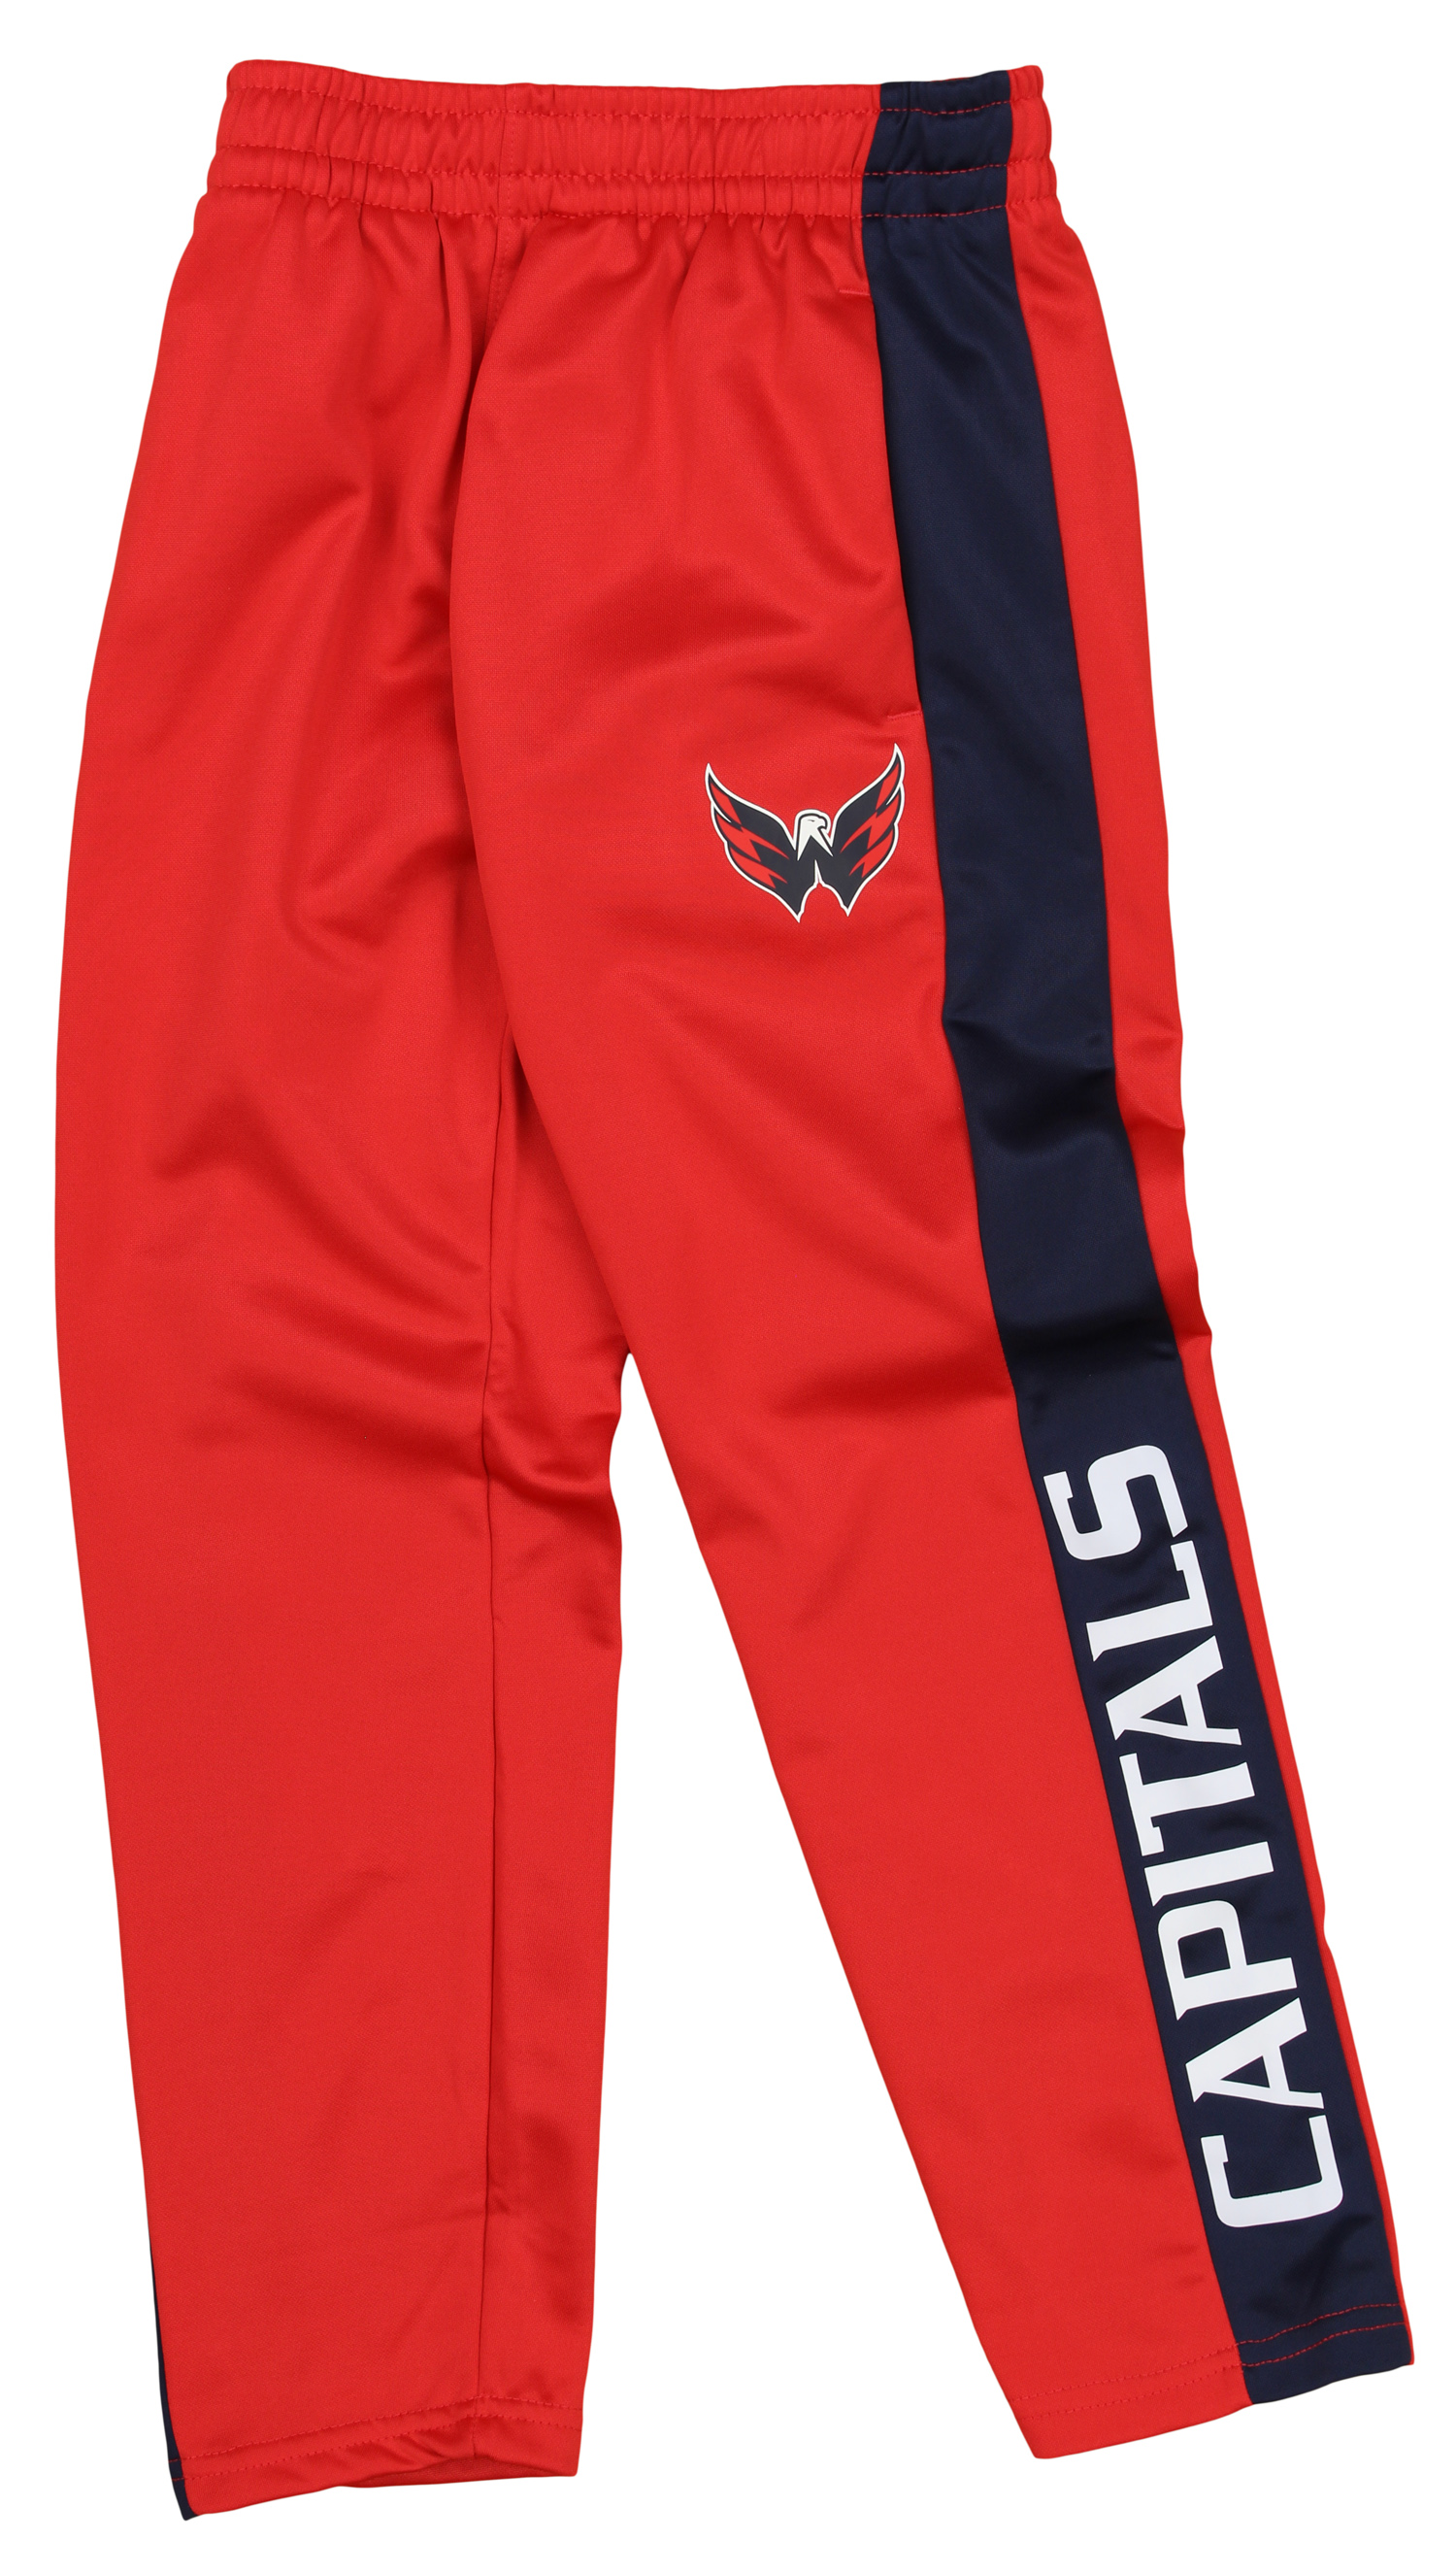 Outerstuff NHL Youth Boys (8-20) Washington Capitals Slim Fit ...